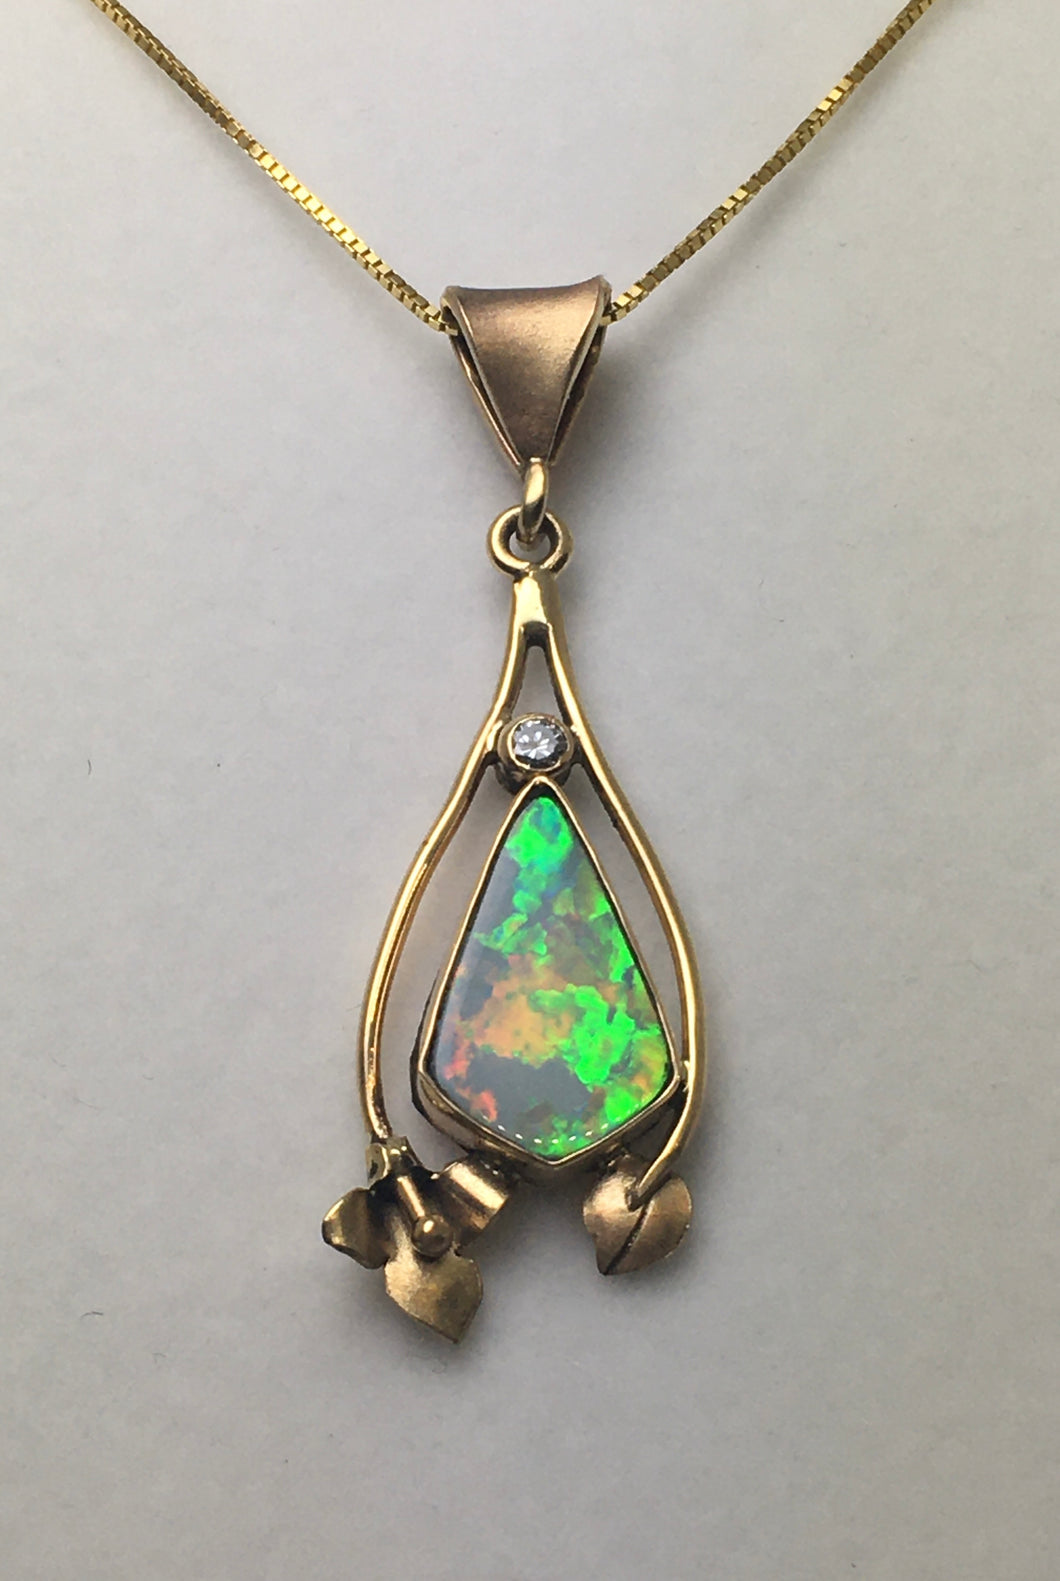 brilliant free form diamond pendant with large flashes of color